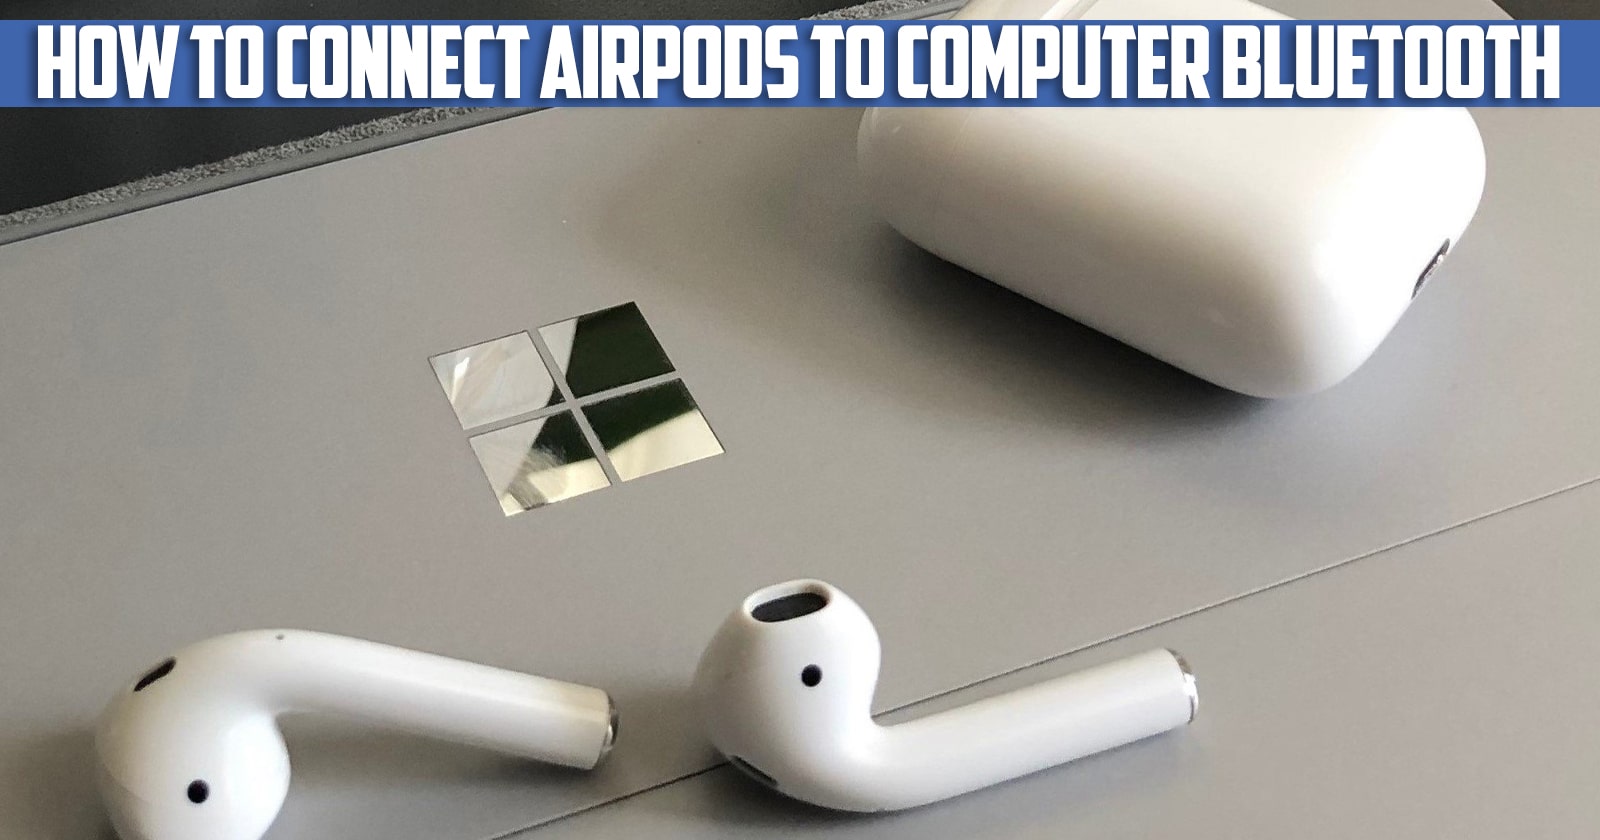 How to Connect AirPods to Computer Bluetooth